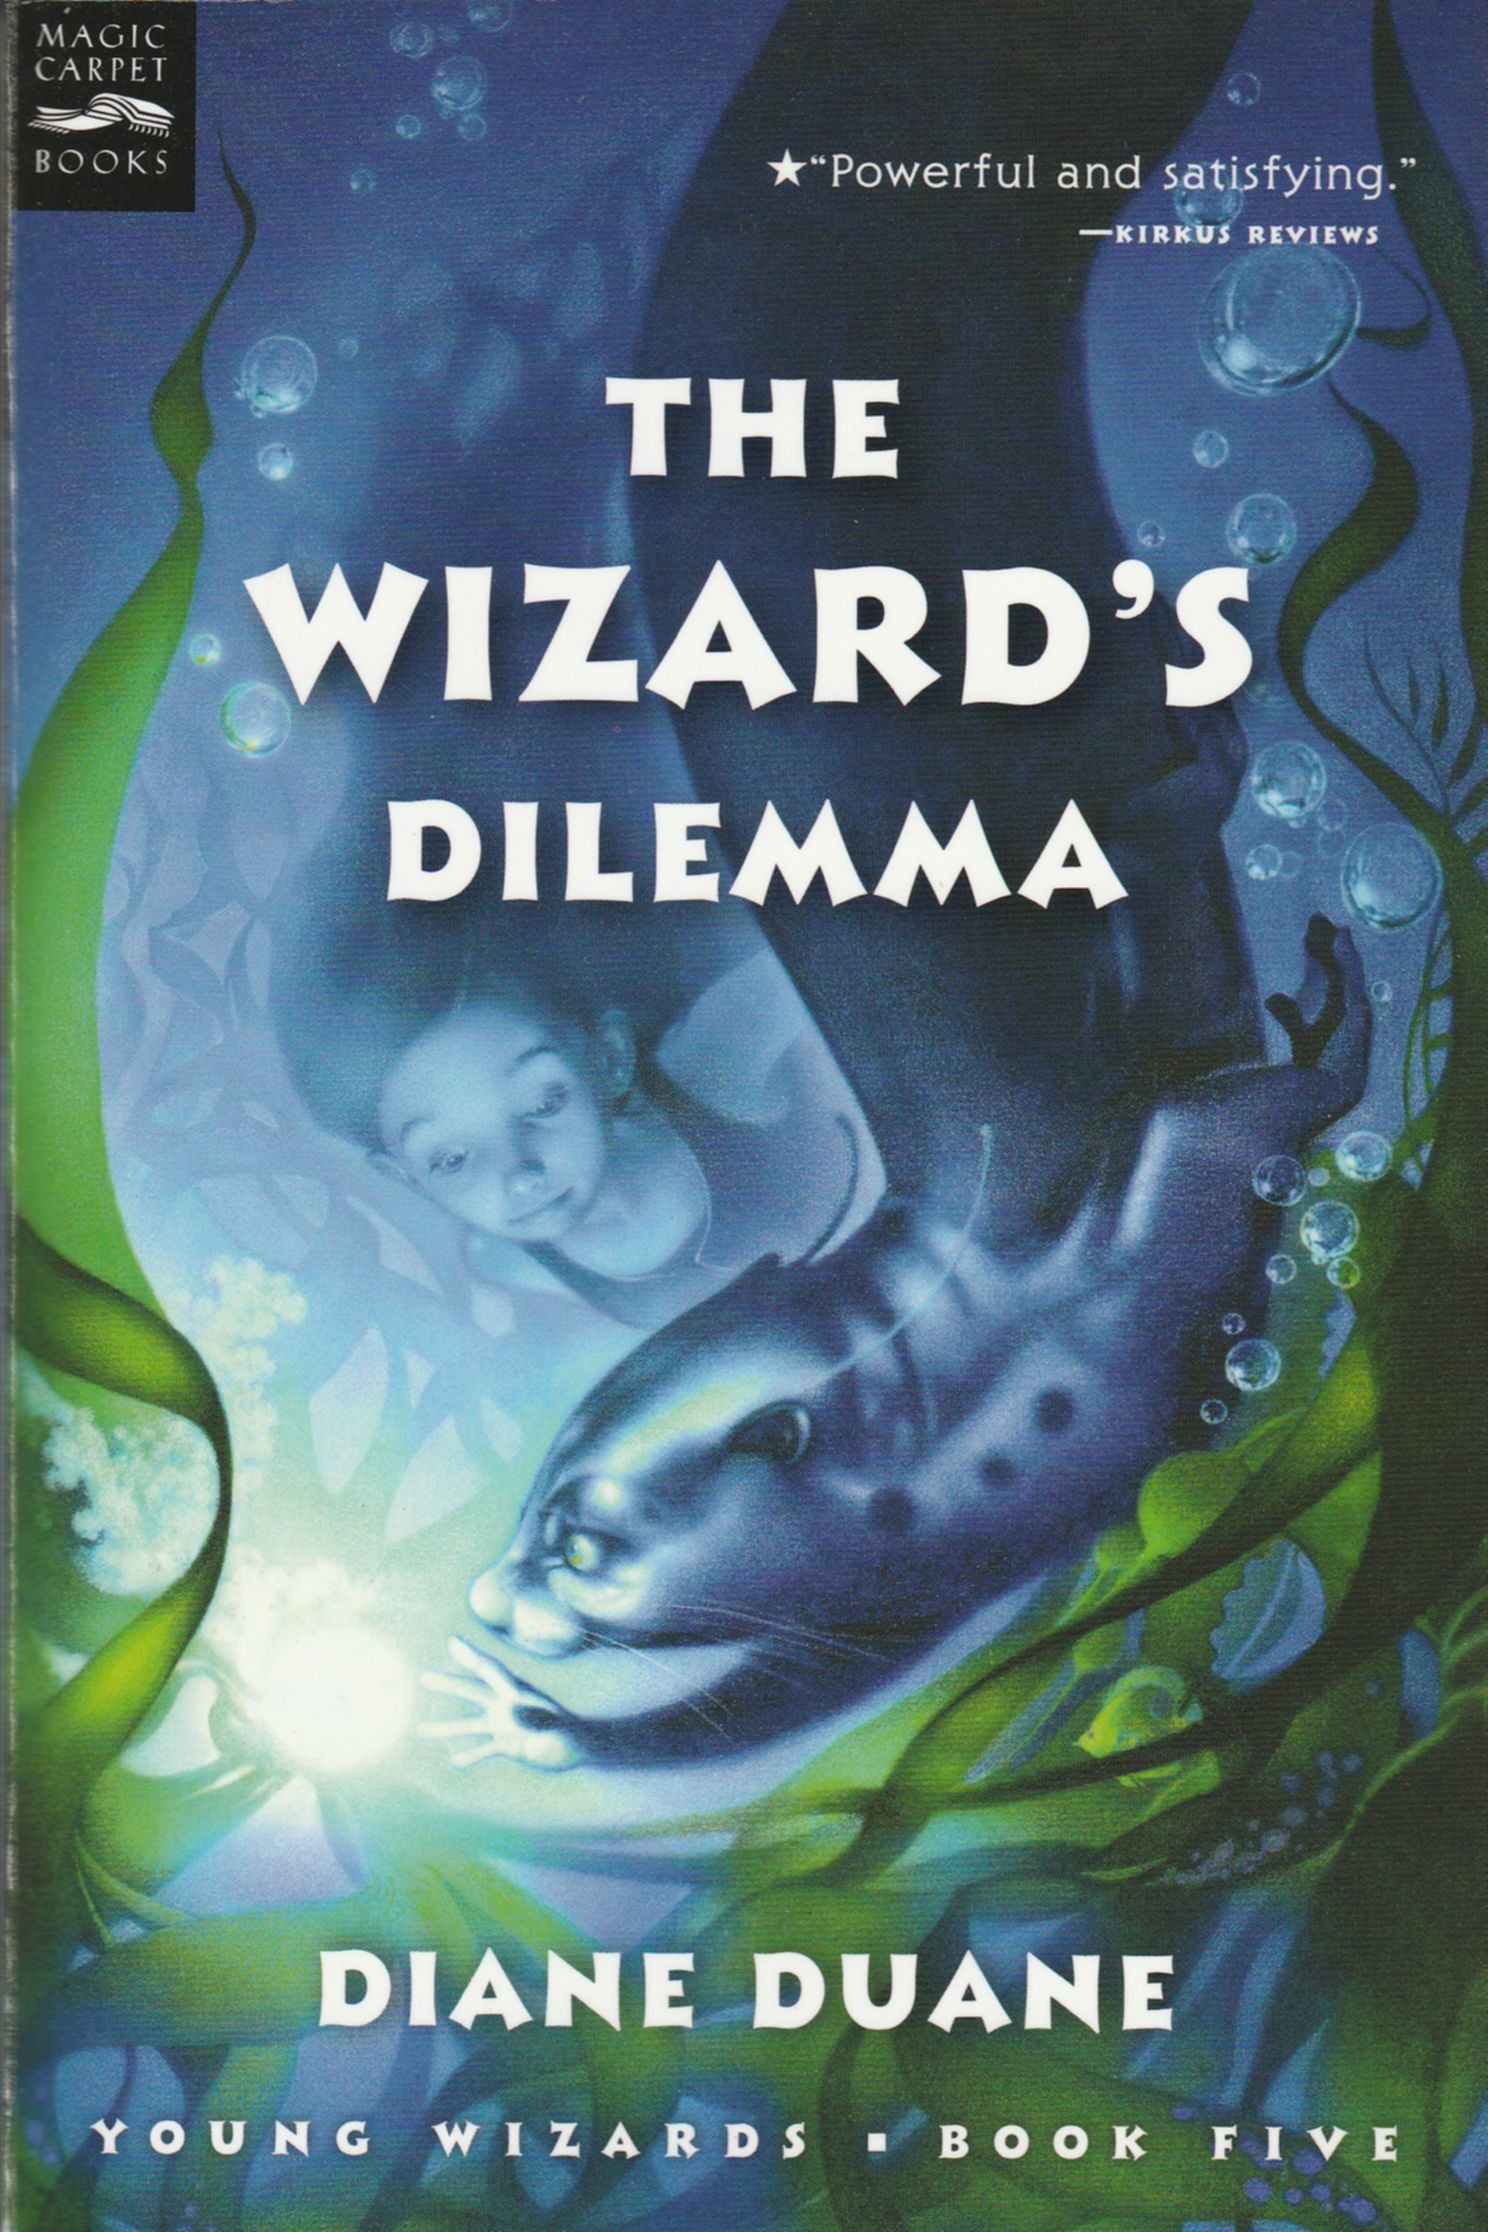 The Wizard's Dilemma, digest format paperback, mint condition, final copies